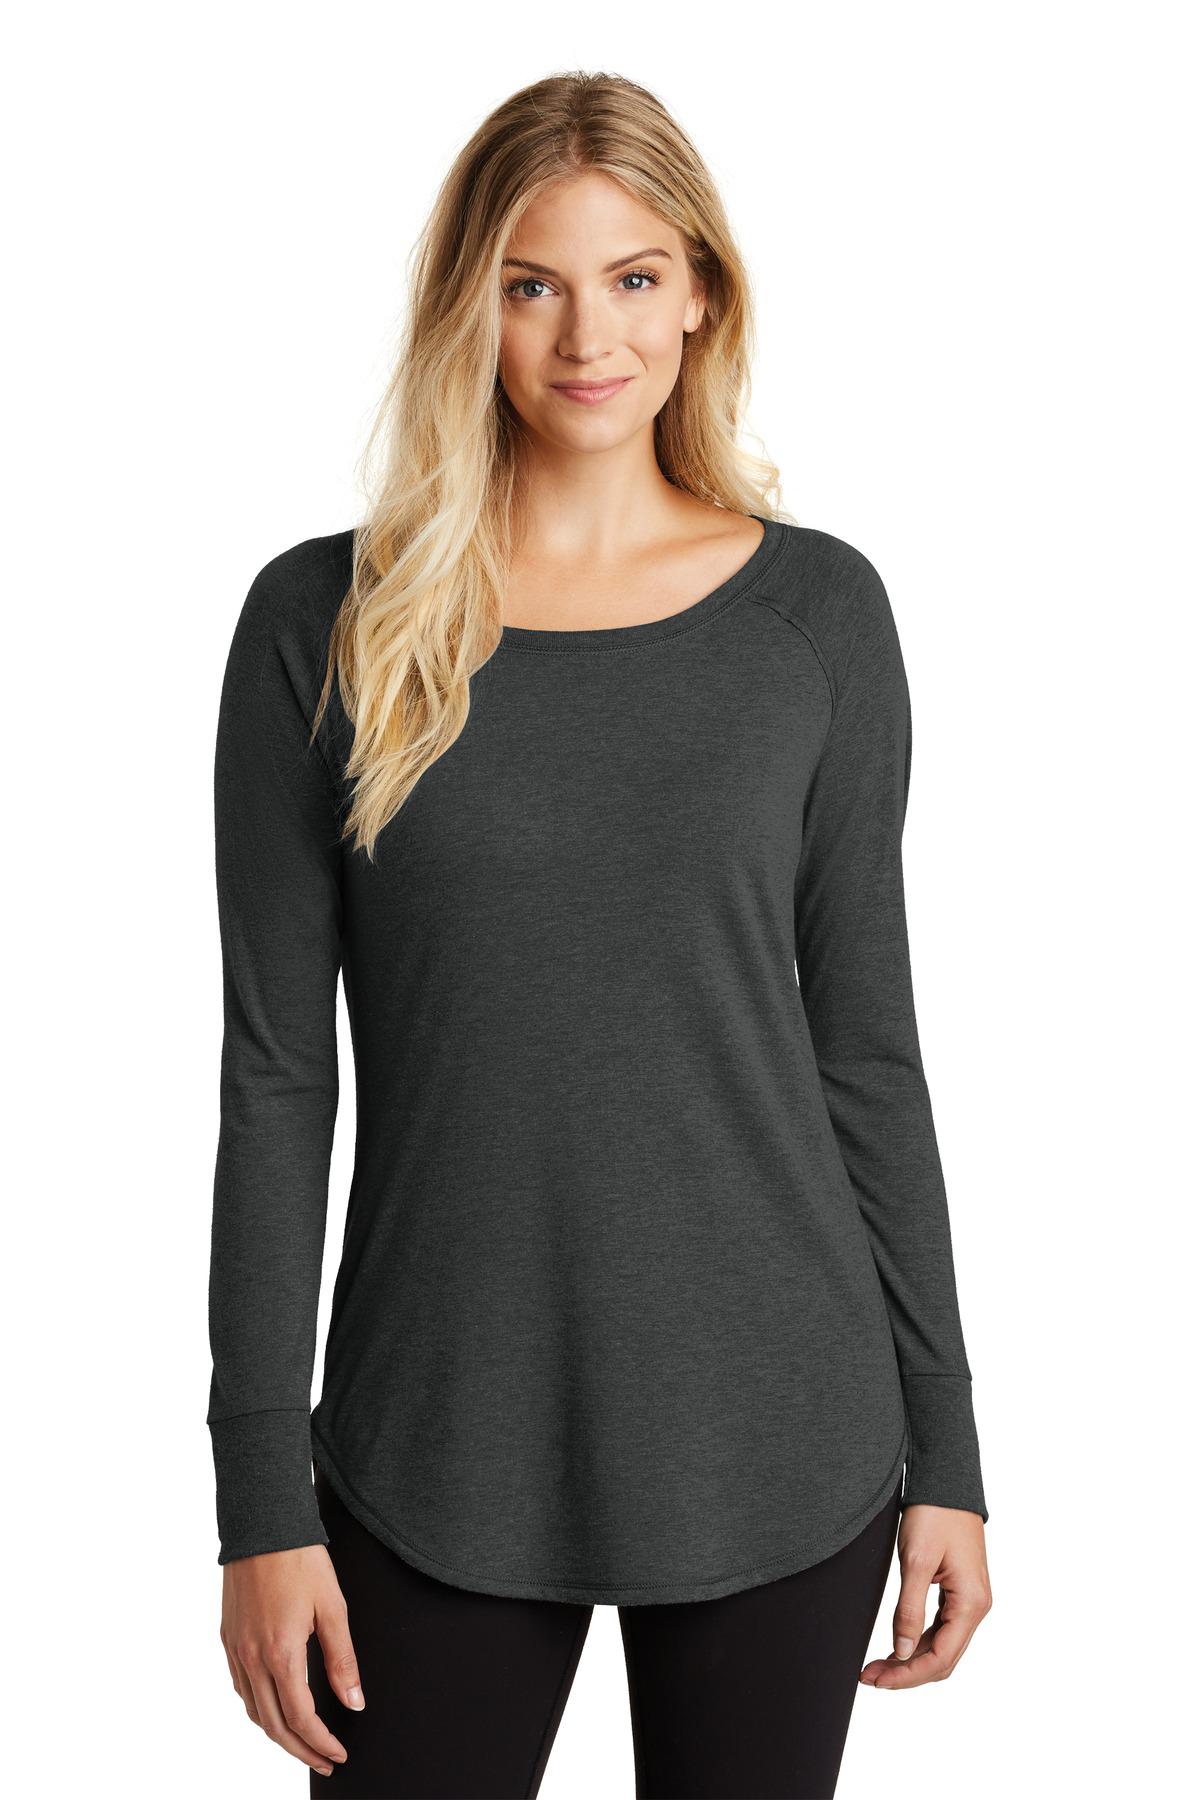 District DT132L Women's Perfect Tri Long Sleeve Tunic Tee - Shirtmax